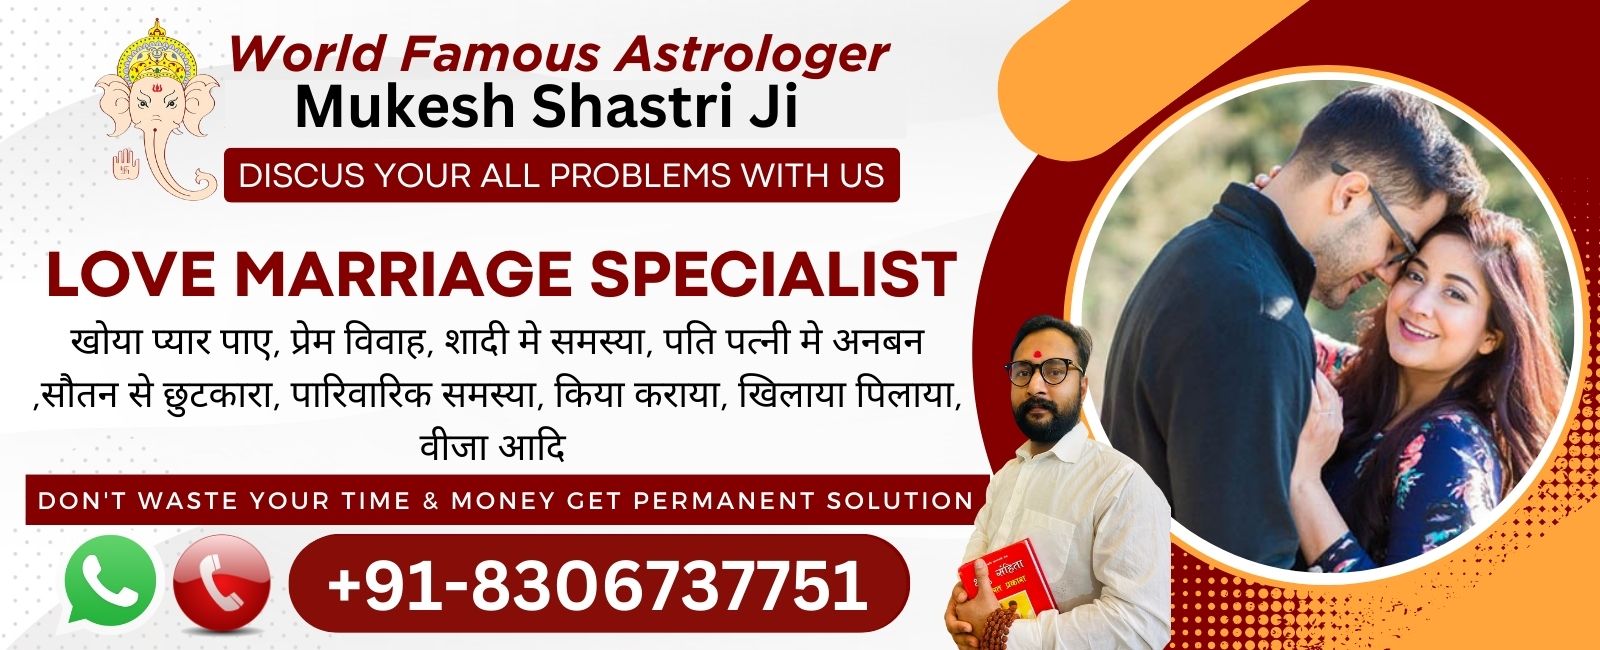 You are currently viewing Love Astrology WhatsApp Number | Free Pandit Ji Astrology at WhatsApp